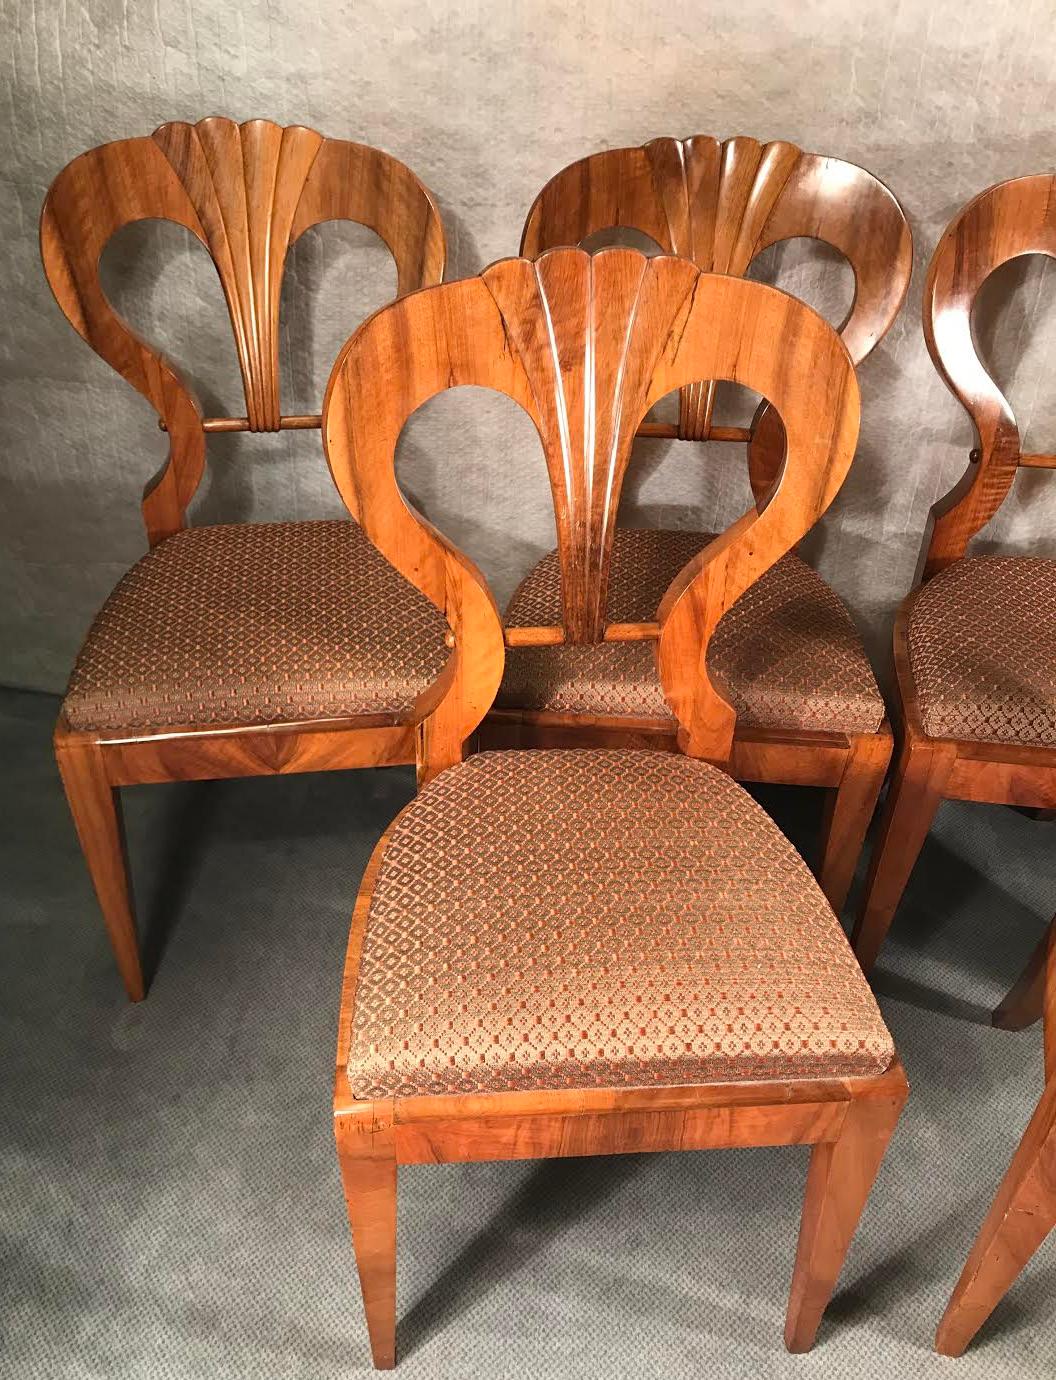 This beautiful set of six biedermeier chairs dates back to around 1820 and comes from Vienna. The chairs are attributed to Josef Danhauser. 
Their design can be found on the original design drawings of the Danhauser furniture workshop which are